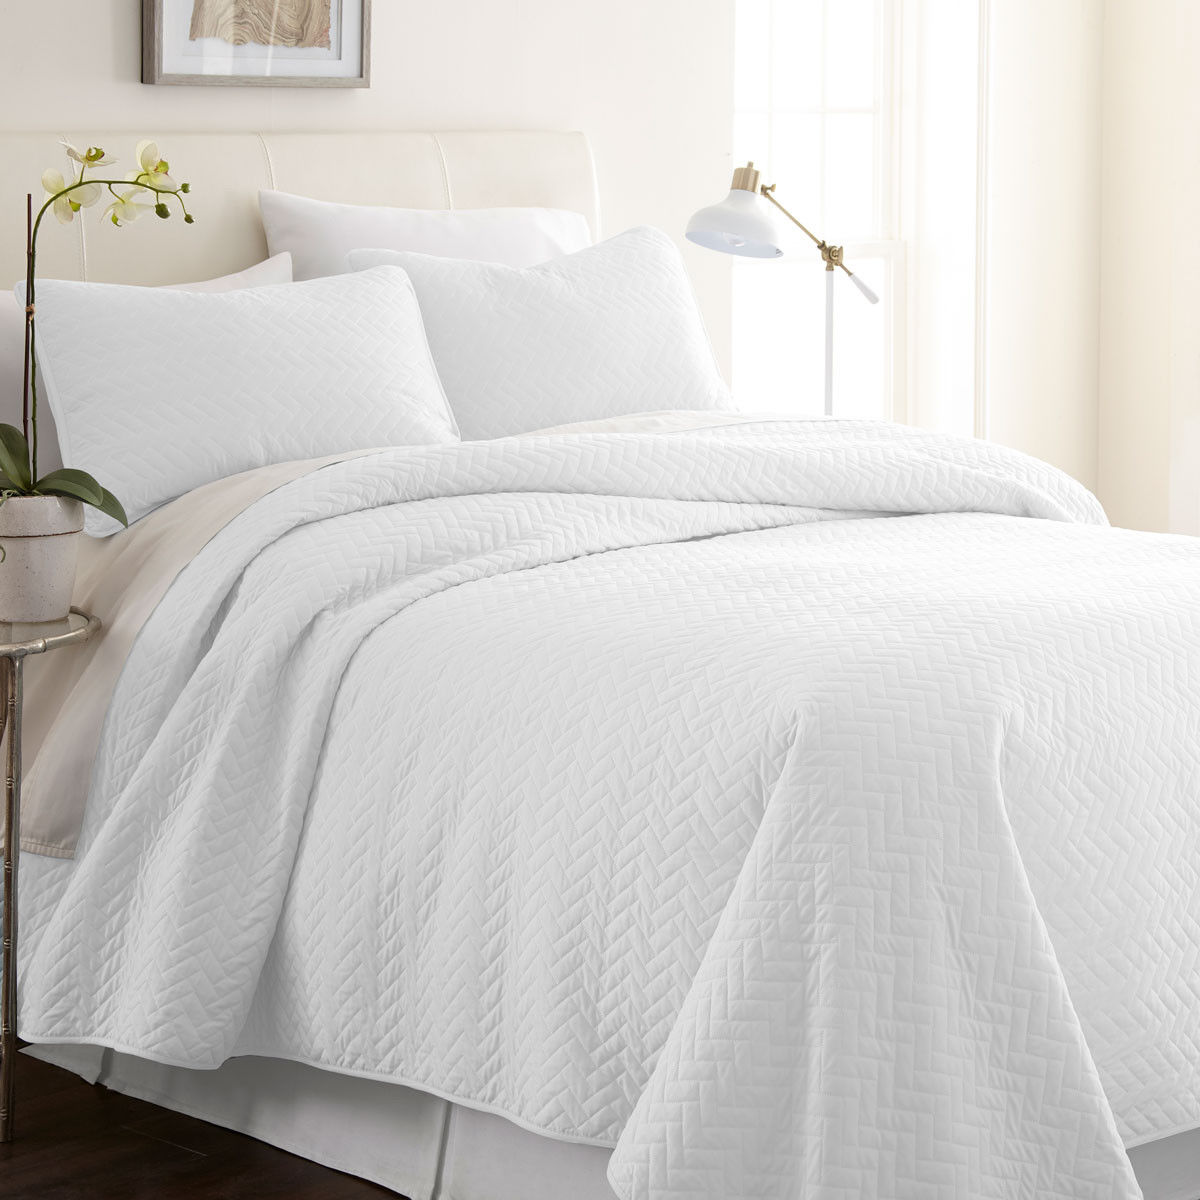 What is the purpose of the 3-Piece Herring Quilted Coverlet Set design?